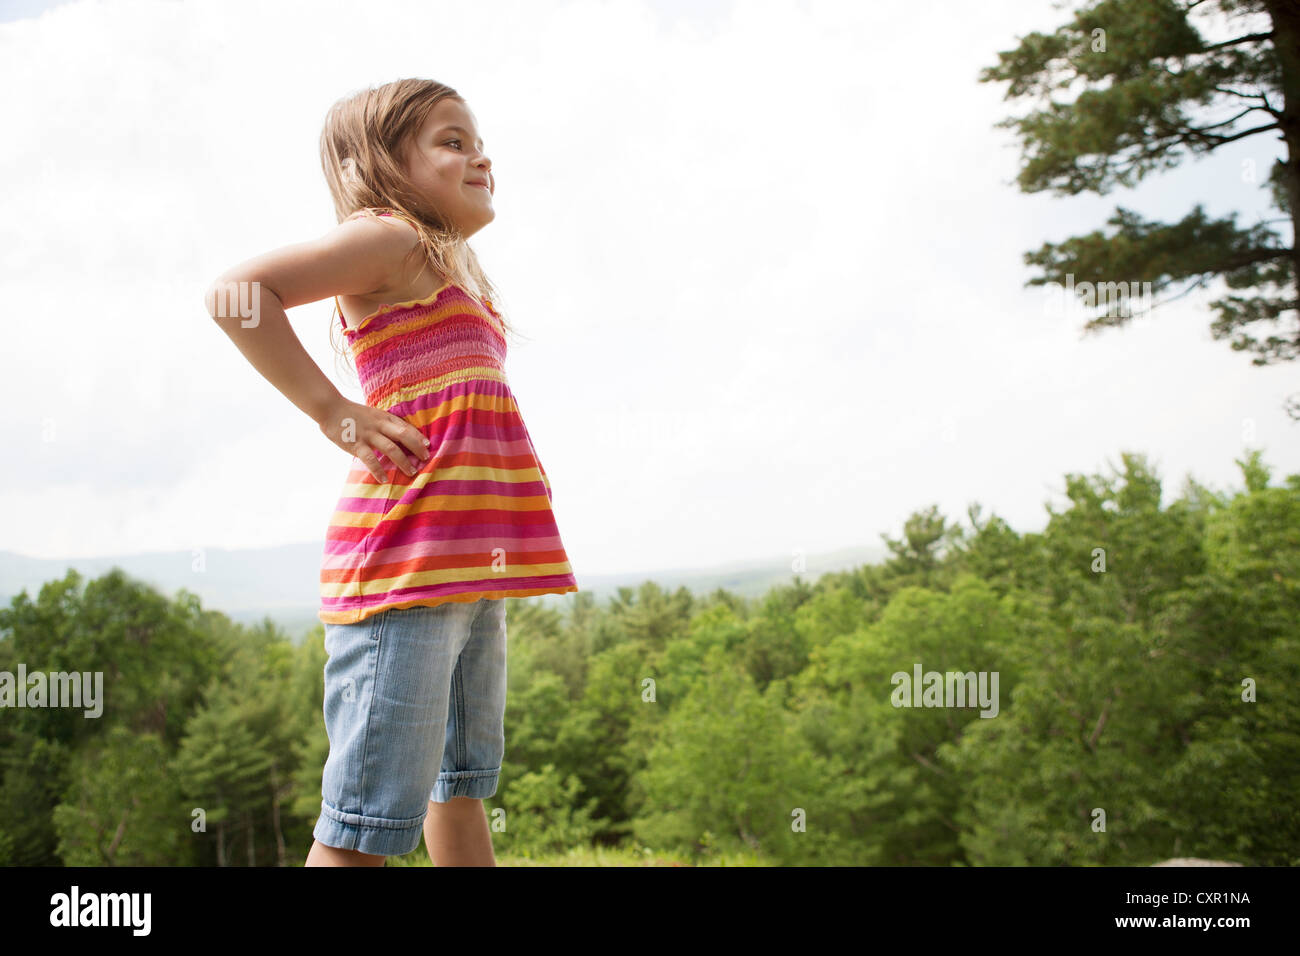 Girl with hands on hips near forest Stock Photo